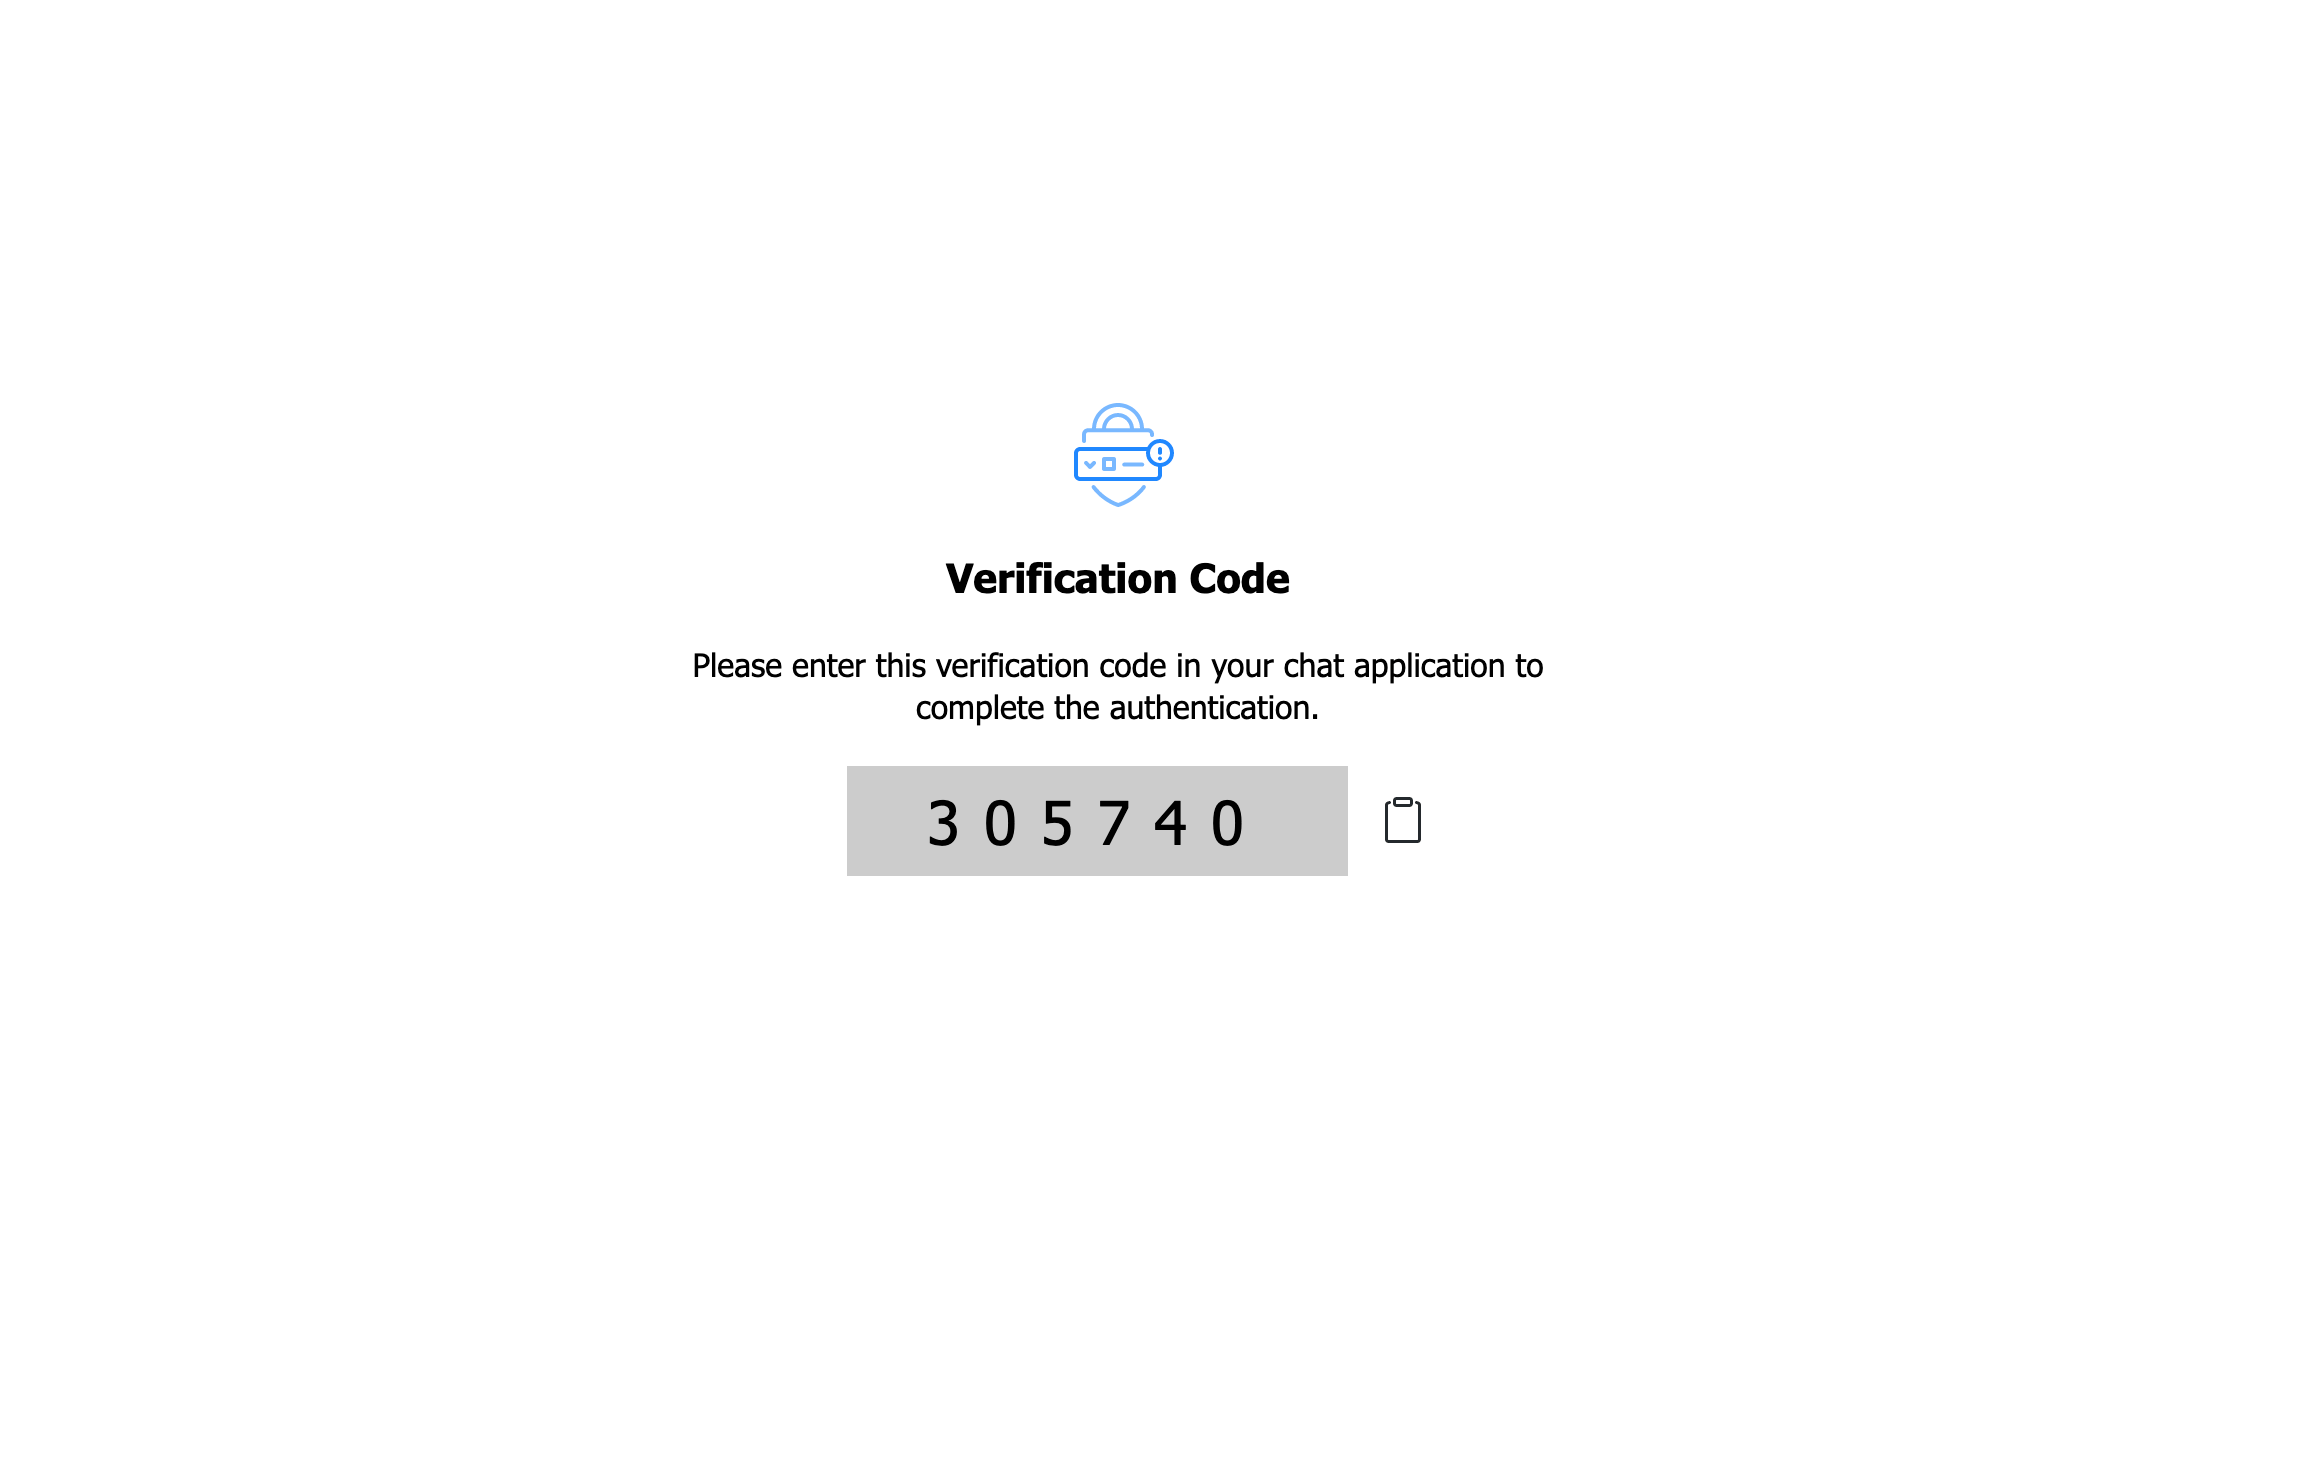 Verification code was generated to connect the GitHub account.